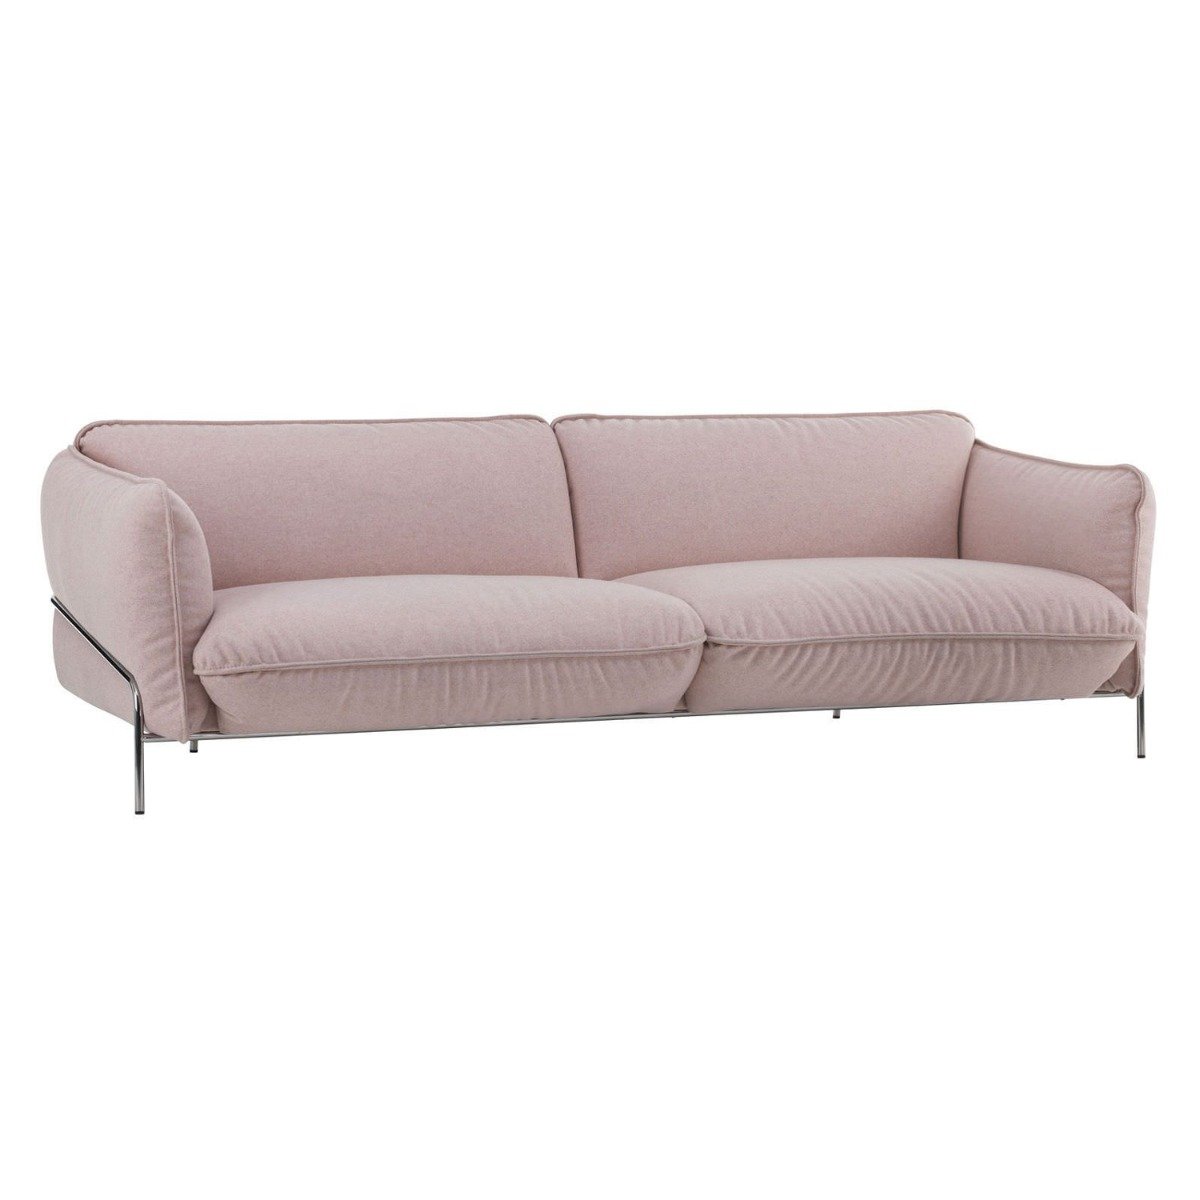 Seneca | Swedese Continental Sofa Furniture-Living Room-Sofas & Couches